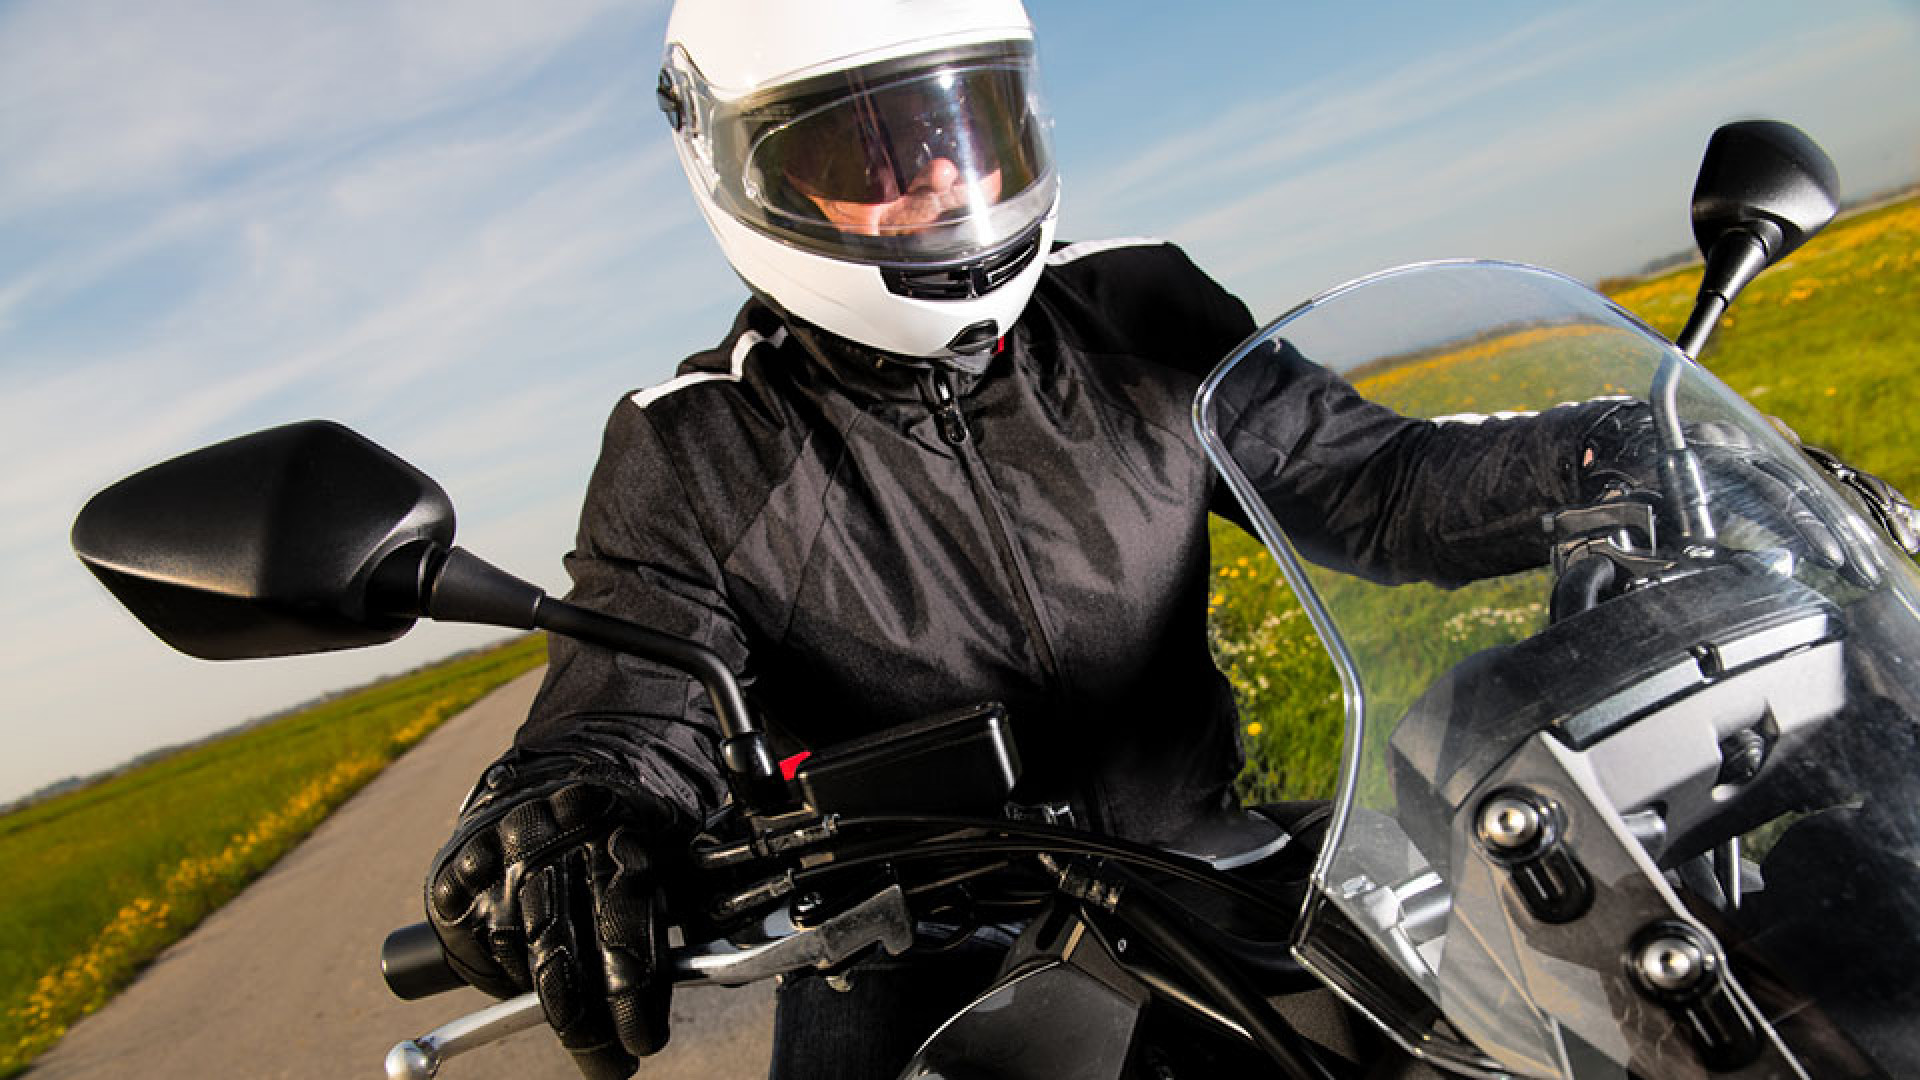 https://www.raceleathers.co.uk/image/cache/catalog/Blog%20Images/Should%20Motorcycle%20Jackets%20Be%20Tight%20or%20Loose-1920x1080.jpg